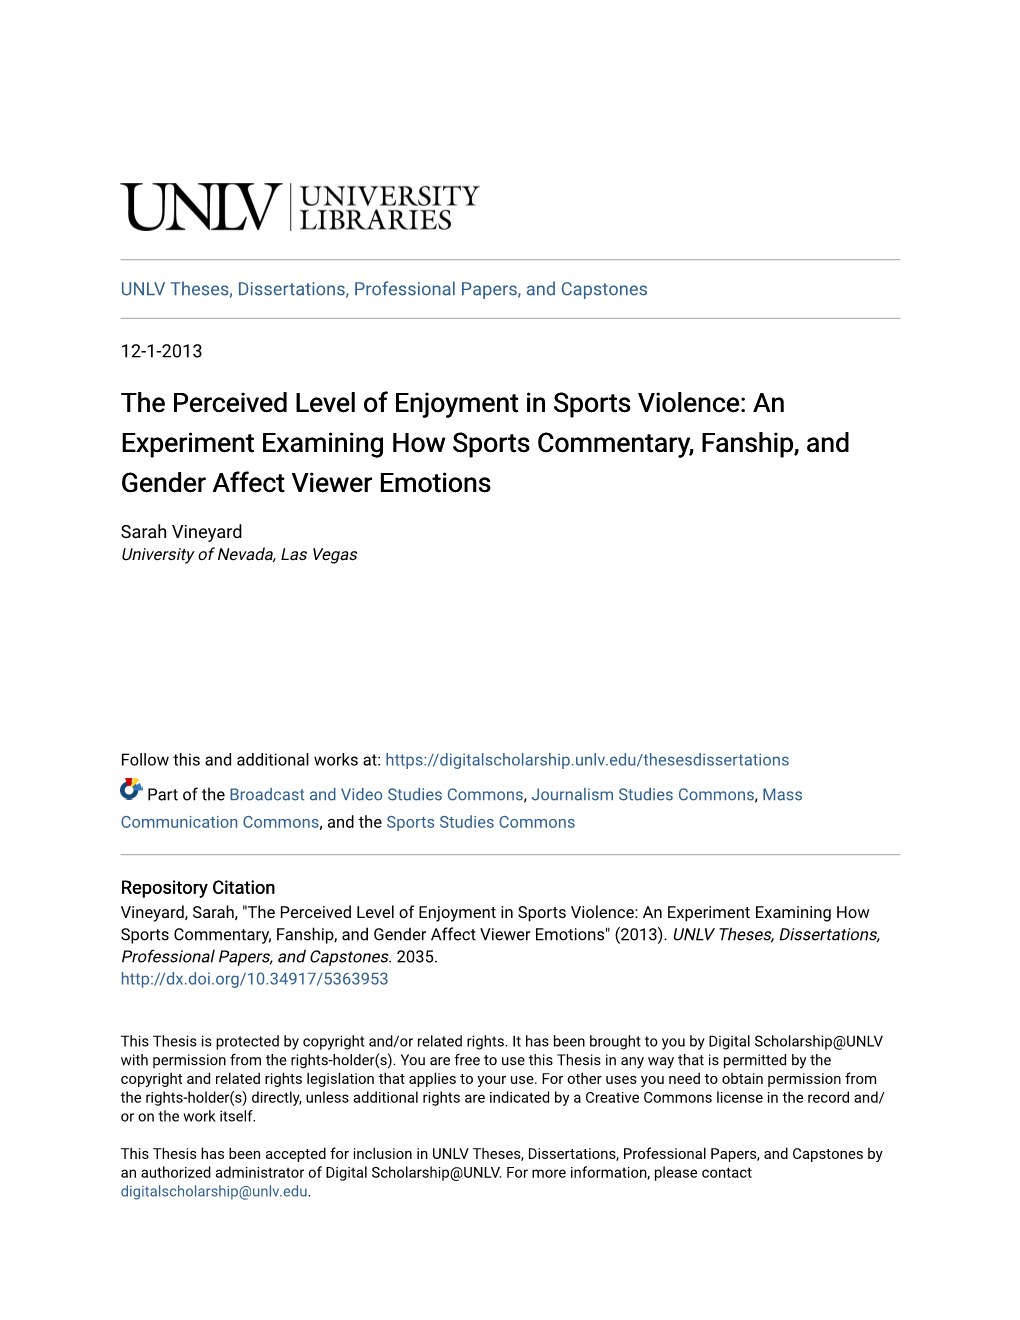 The Perceived Level of Enjoyment in Sports Violence: an Experiment Examining How Sports Commentary, Fanship, and Gender Affect Viewer Emotions